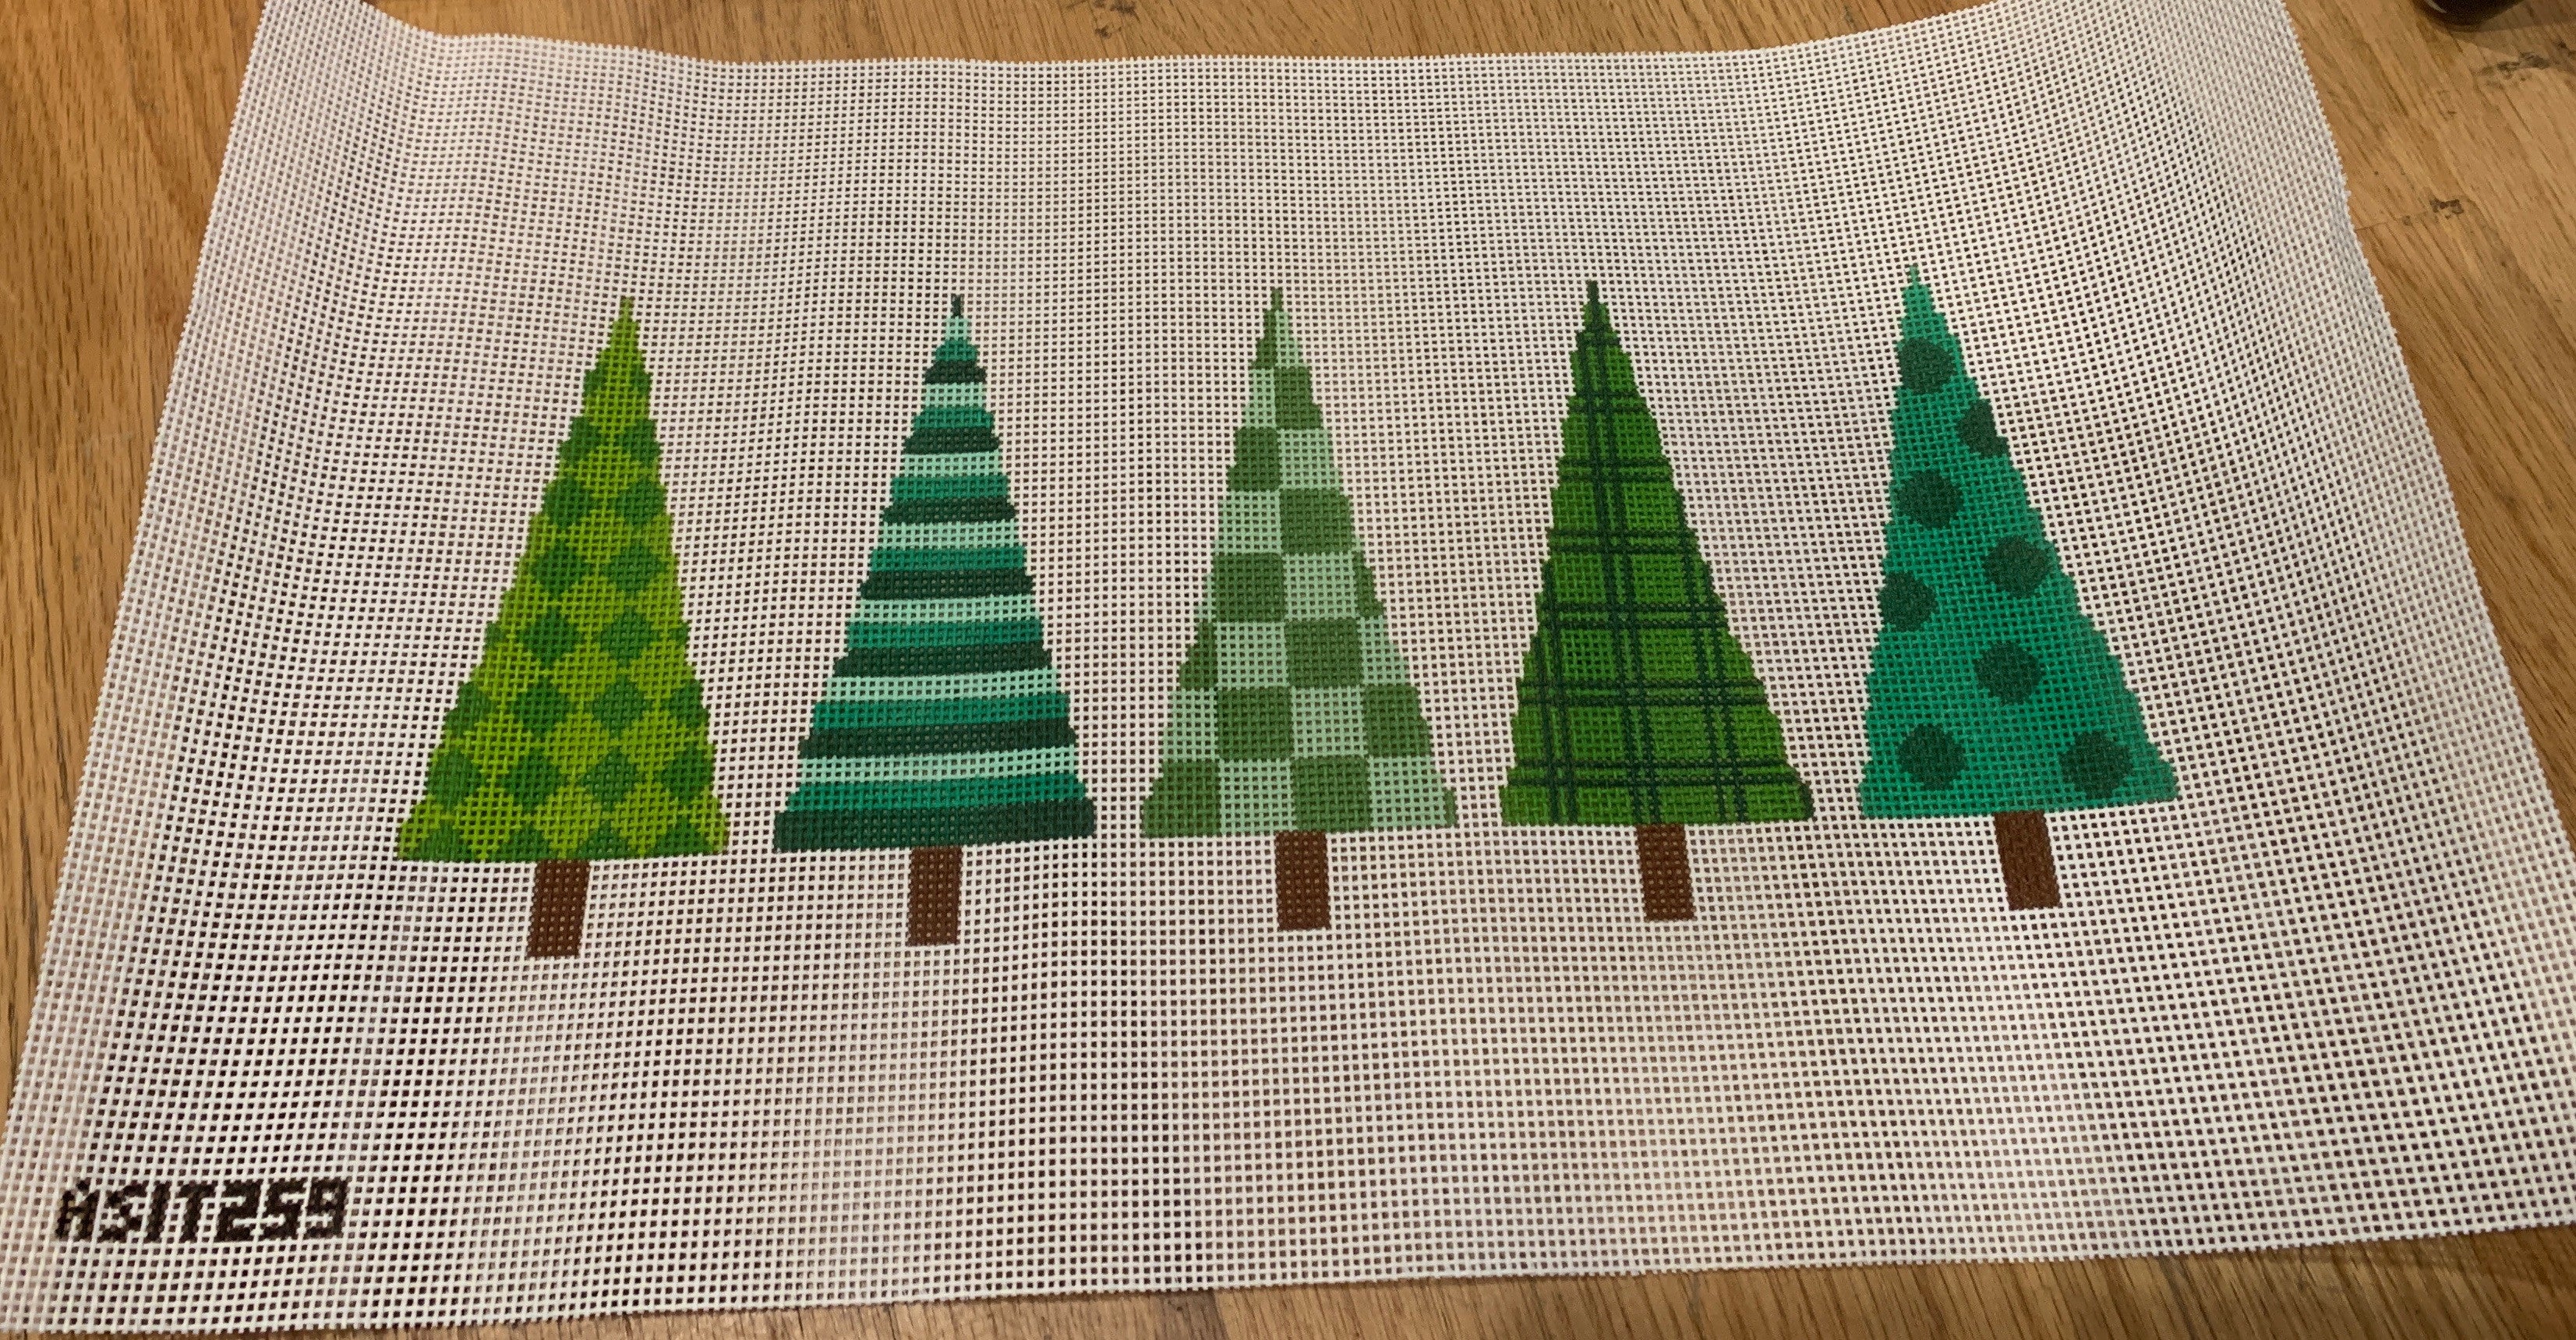 A Stitch In Time ASIT259 Christmas Trees 13 mesh